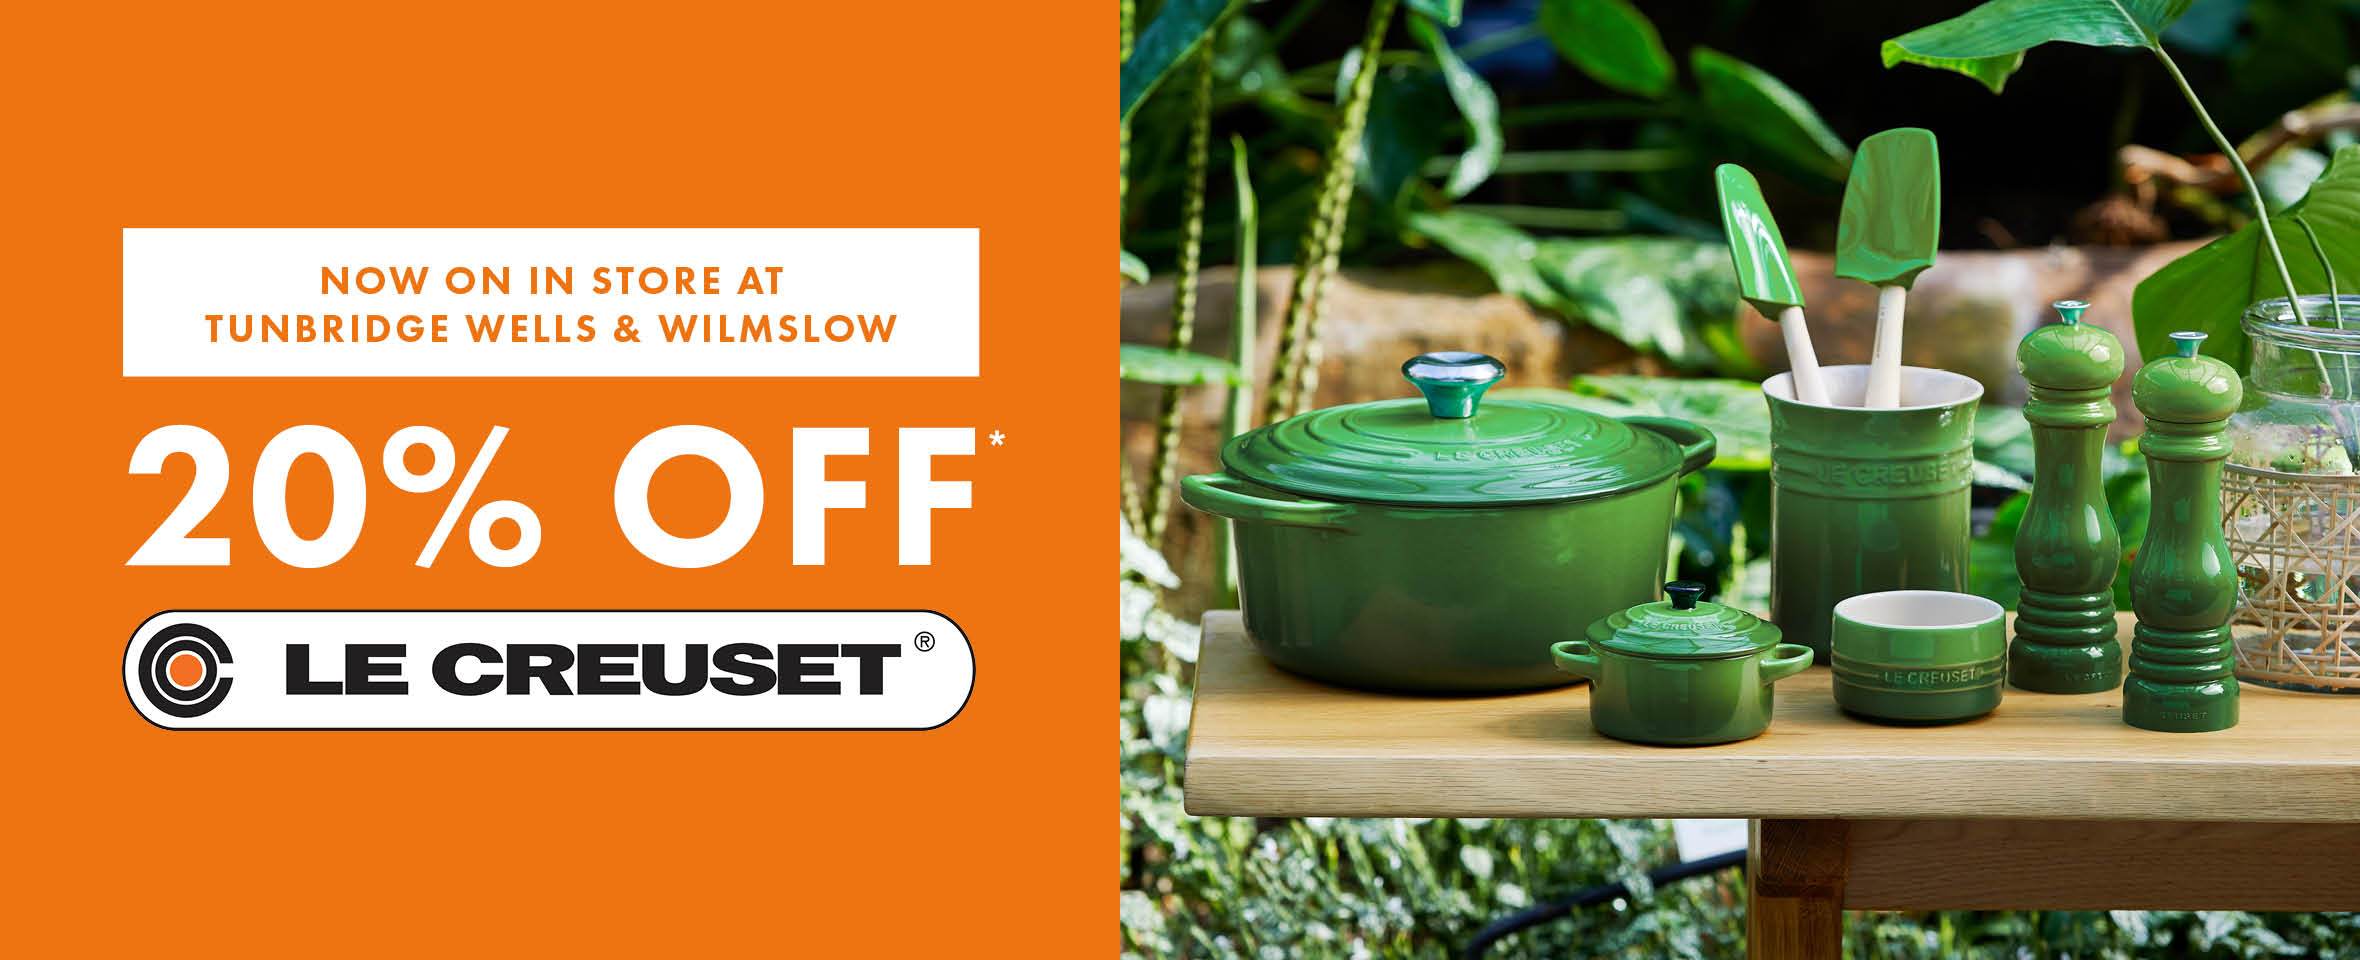 20% off Le Creuset in store at Tunbridge Wells and Wilmslow.